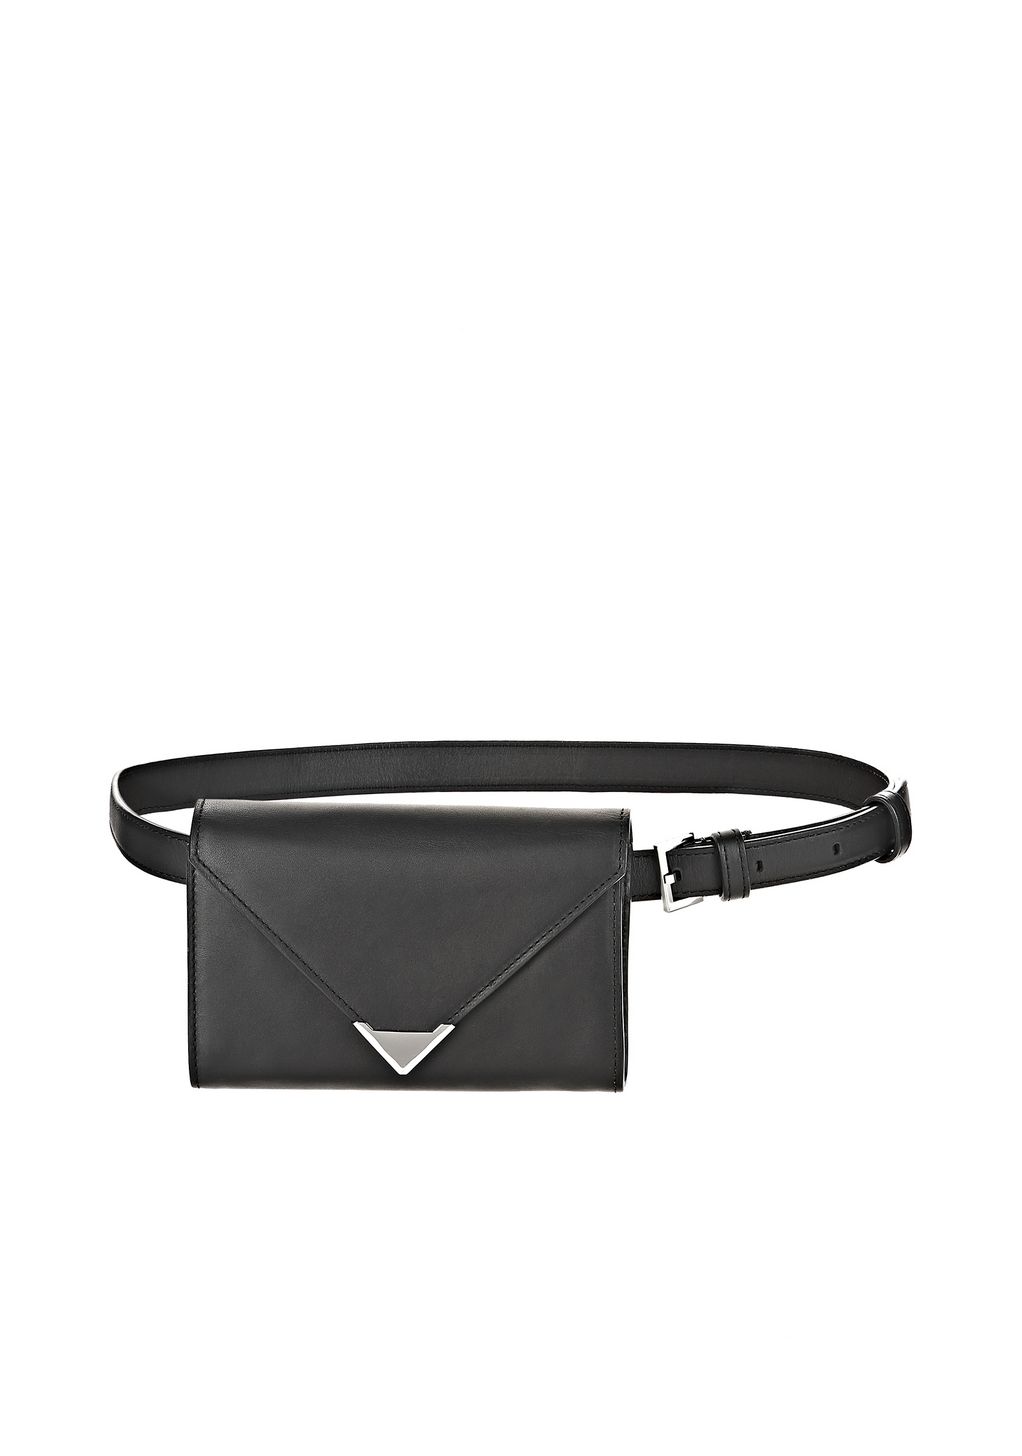 Alexander Wang ‎PRISMA BELT BAG IN BLACK WITH RHODIUM ‎ ‎SMALL LEATHER GOOD‎ | Official Site